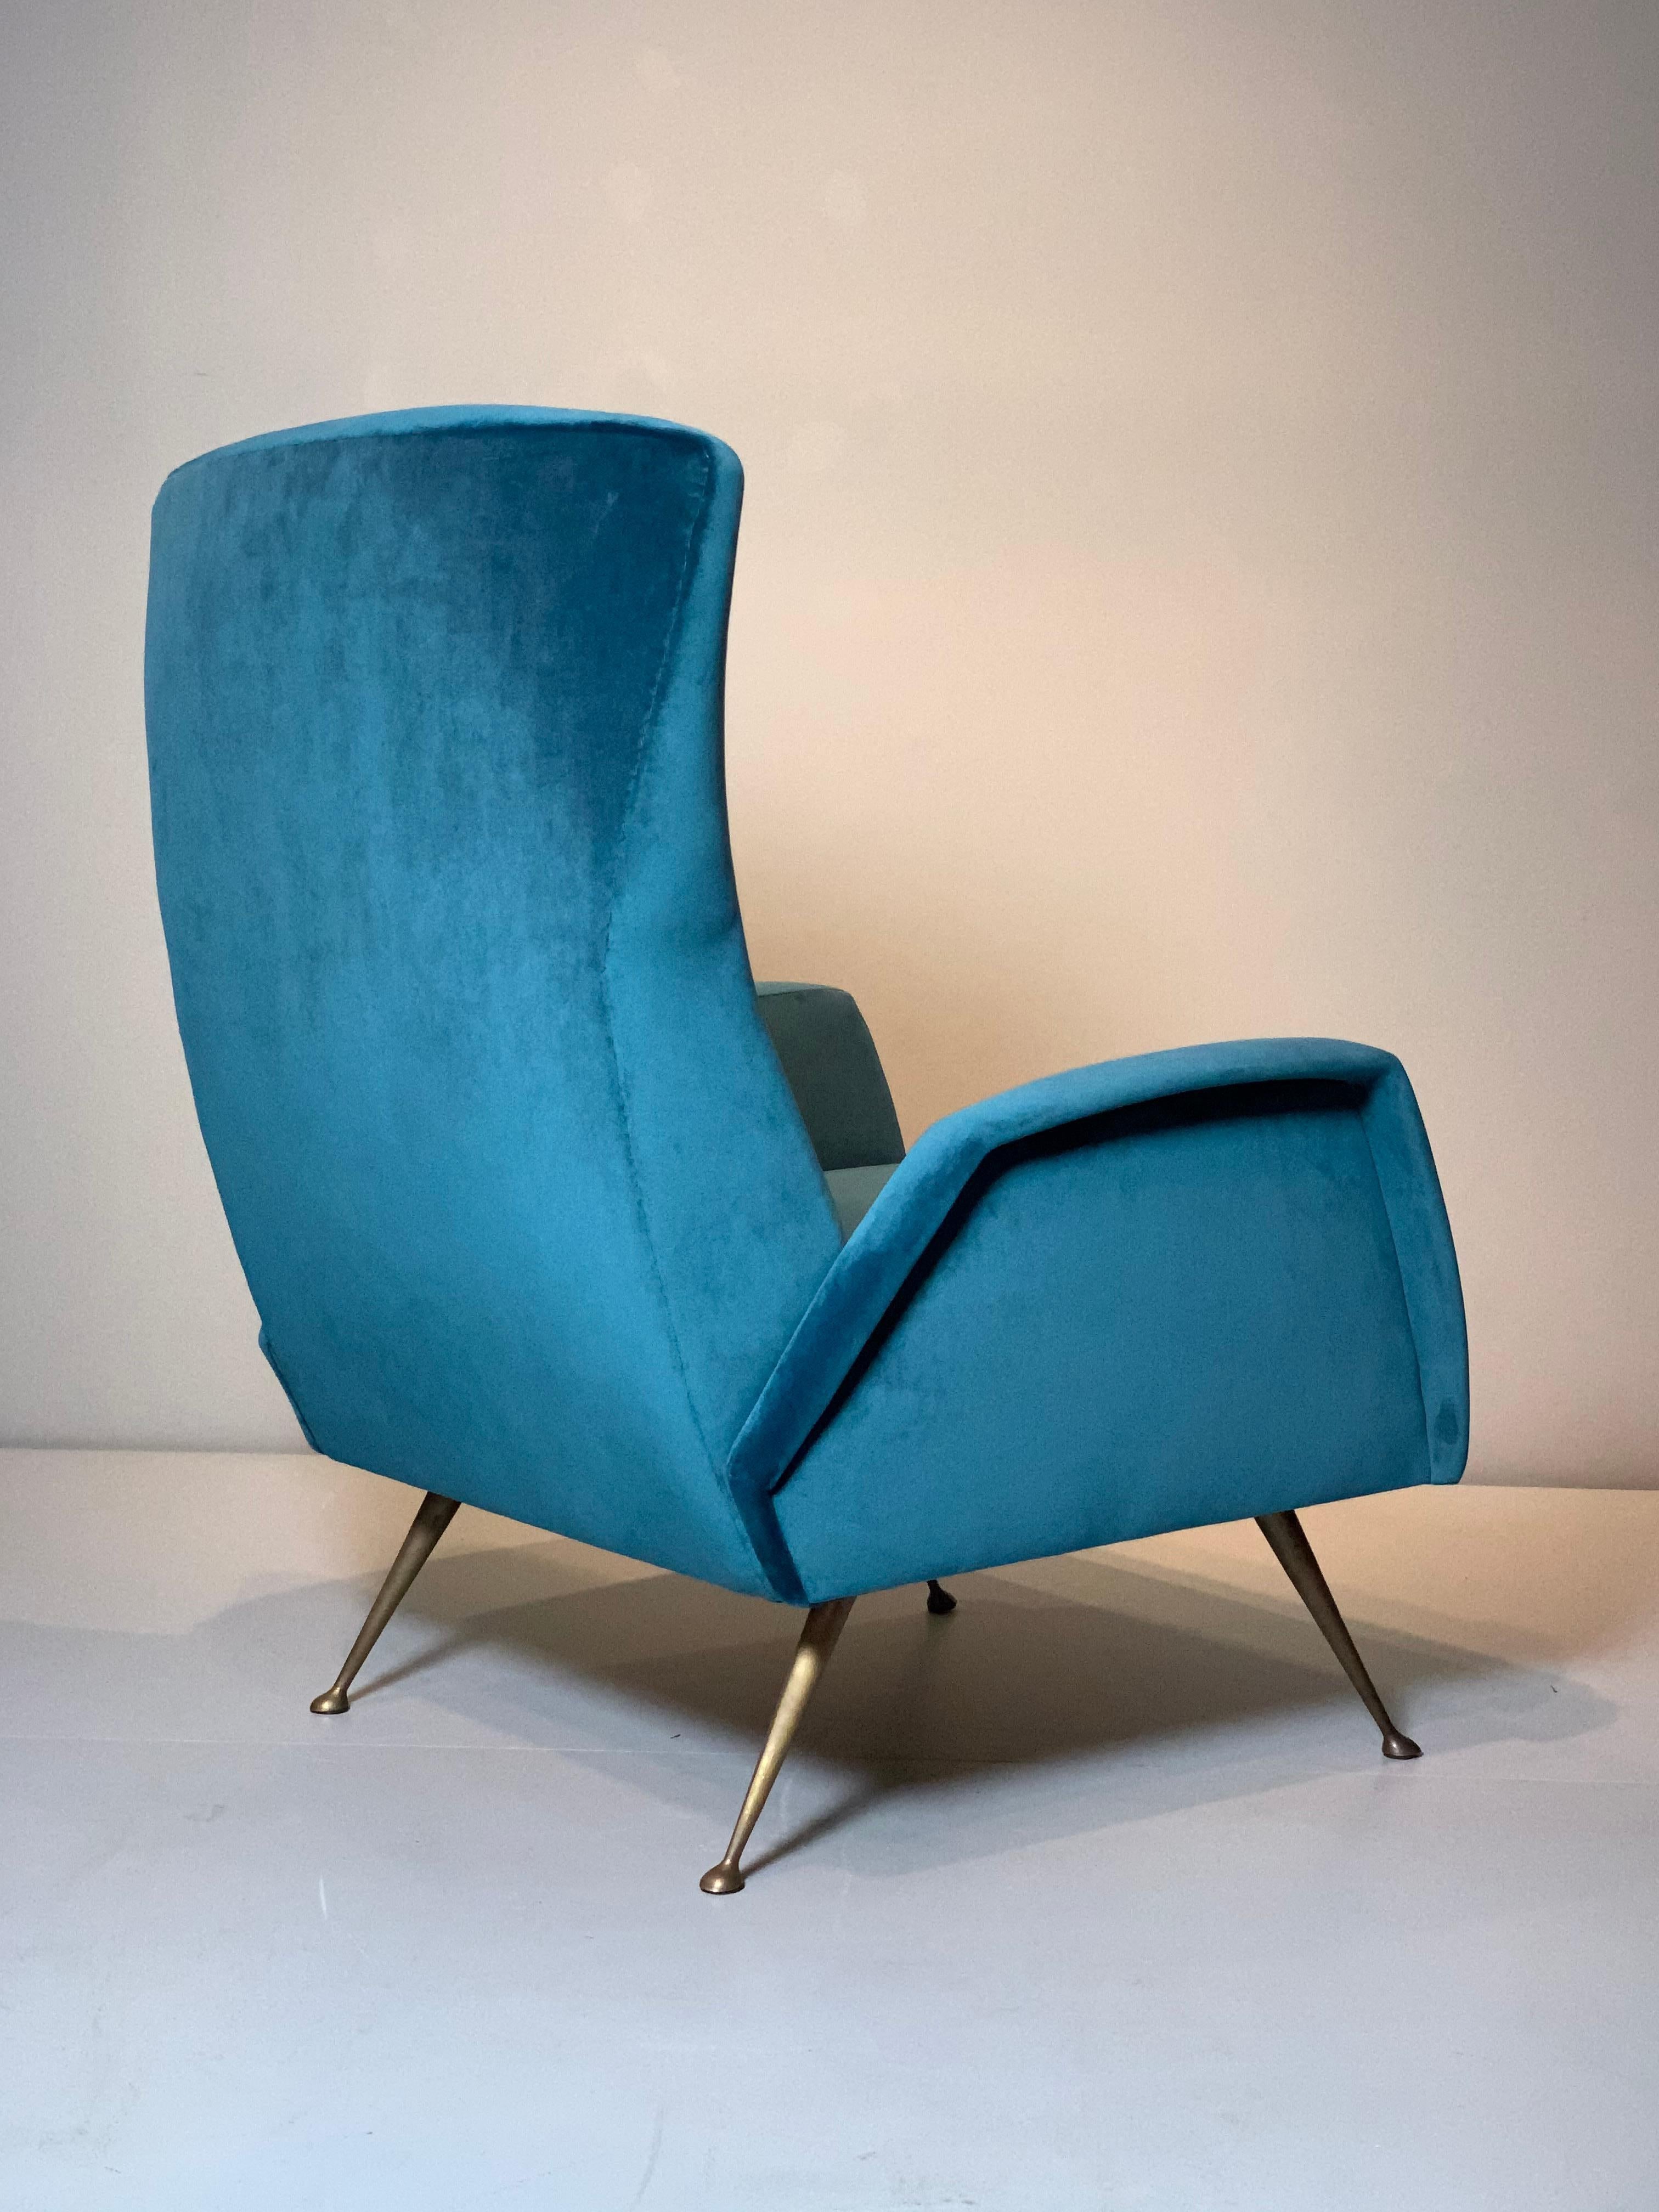 An armchair / Easy Chair imported from Italy in the 